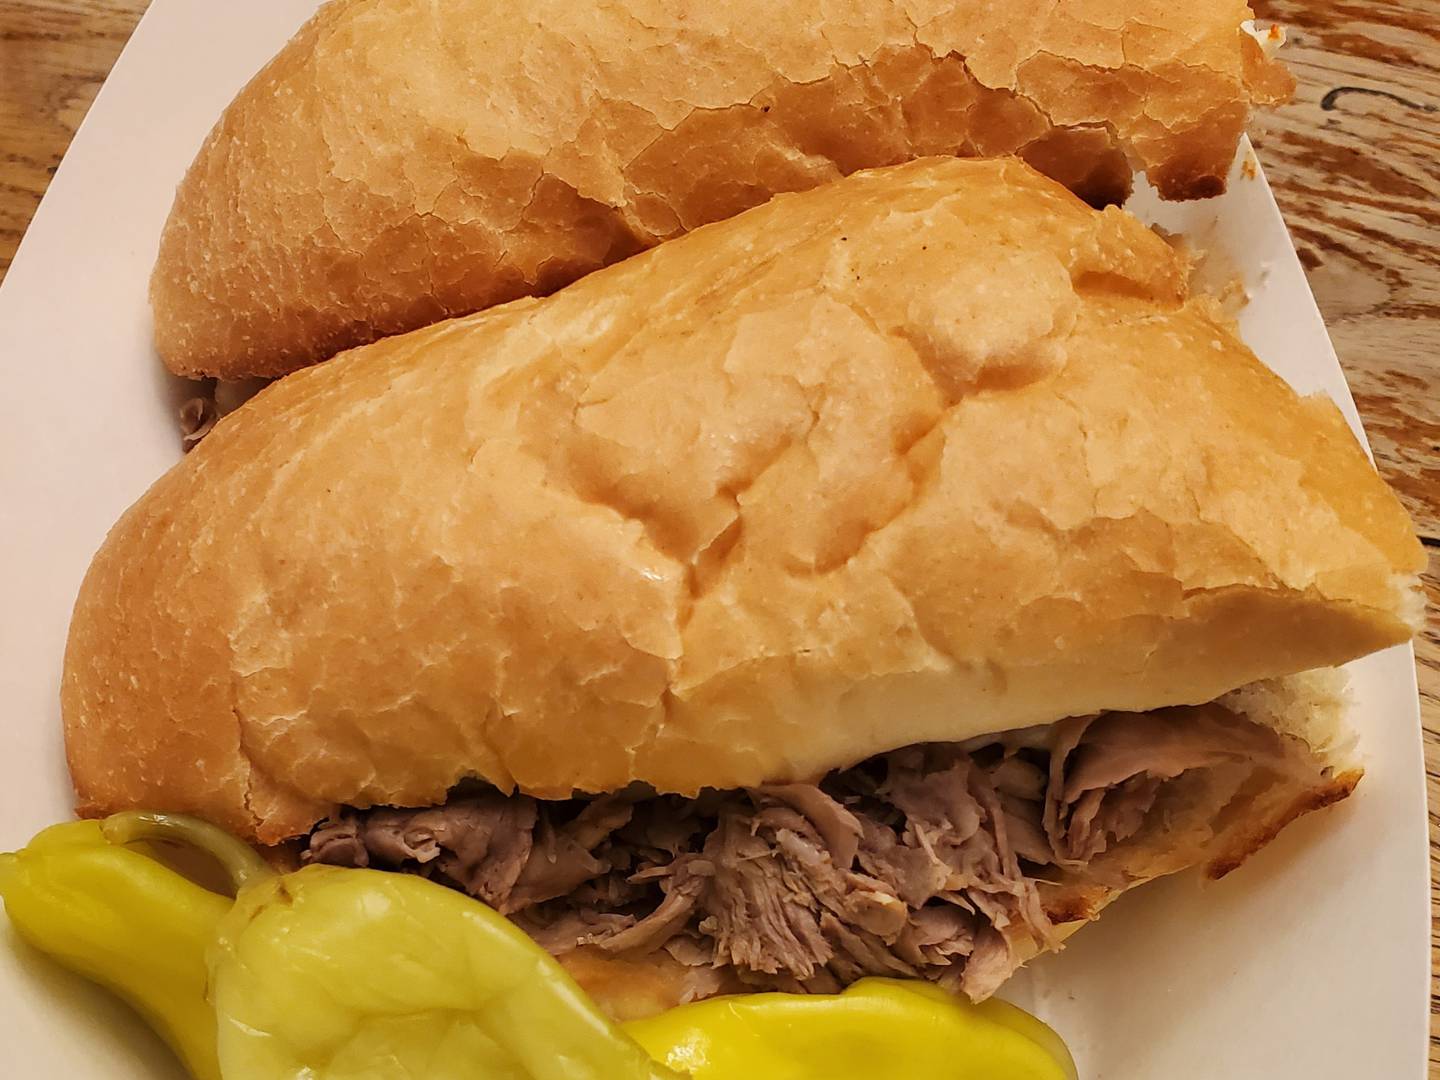 To top it off, we also ordered an Italian Beef Sandwich ($8.00).  The sandwich was great and came with a side of peppers to go with it.  It was flavorful and had just the right amount of meat to fill his bun without becoming a mess on the plate.